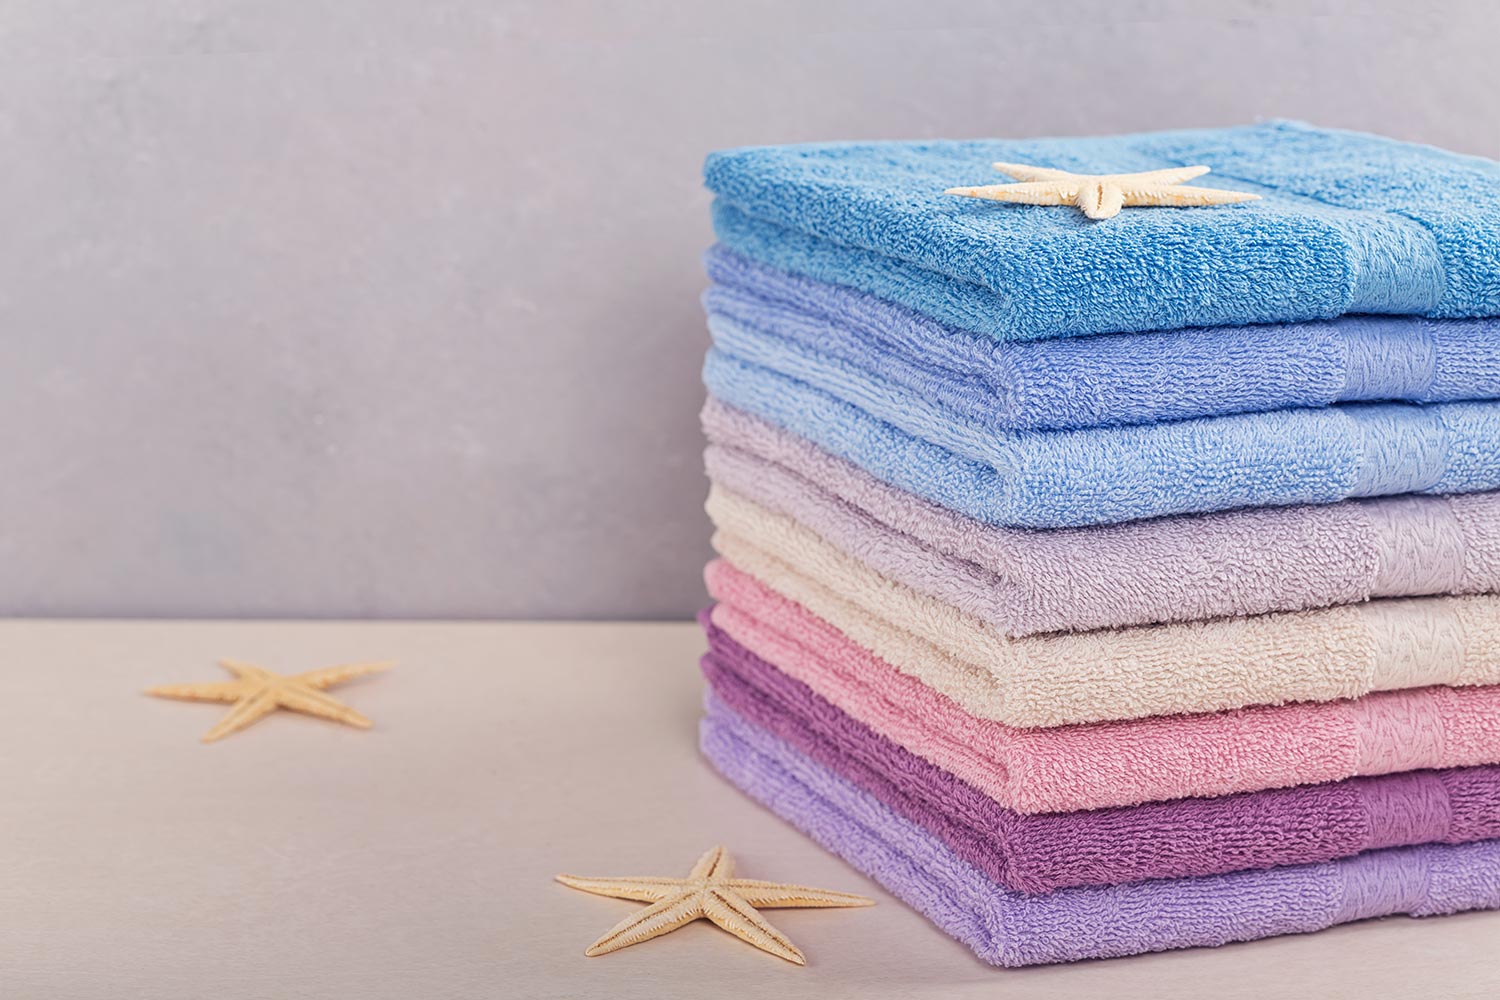 Stack of colorful bath towels on light background